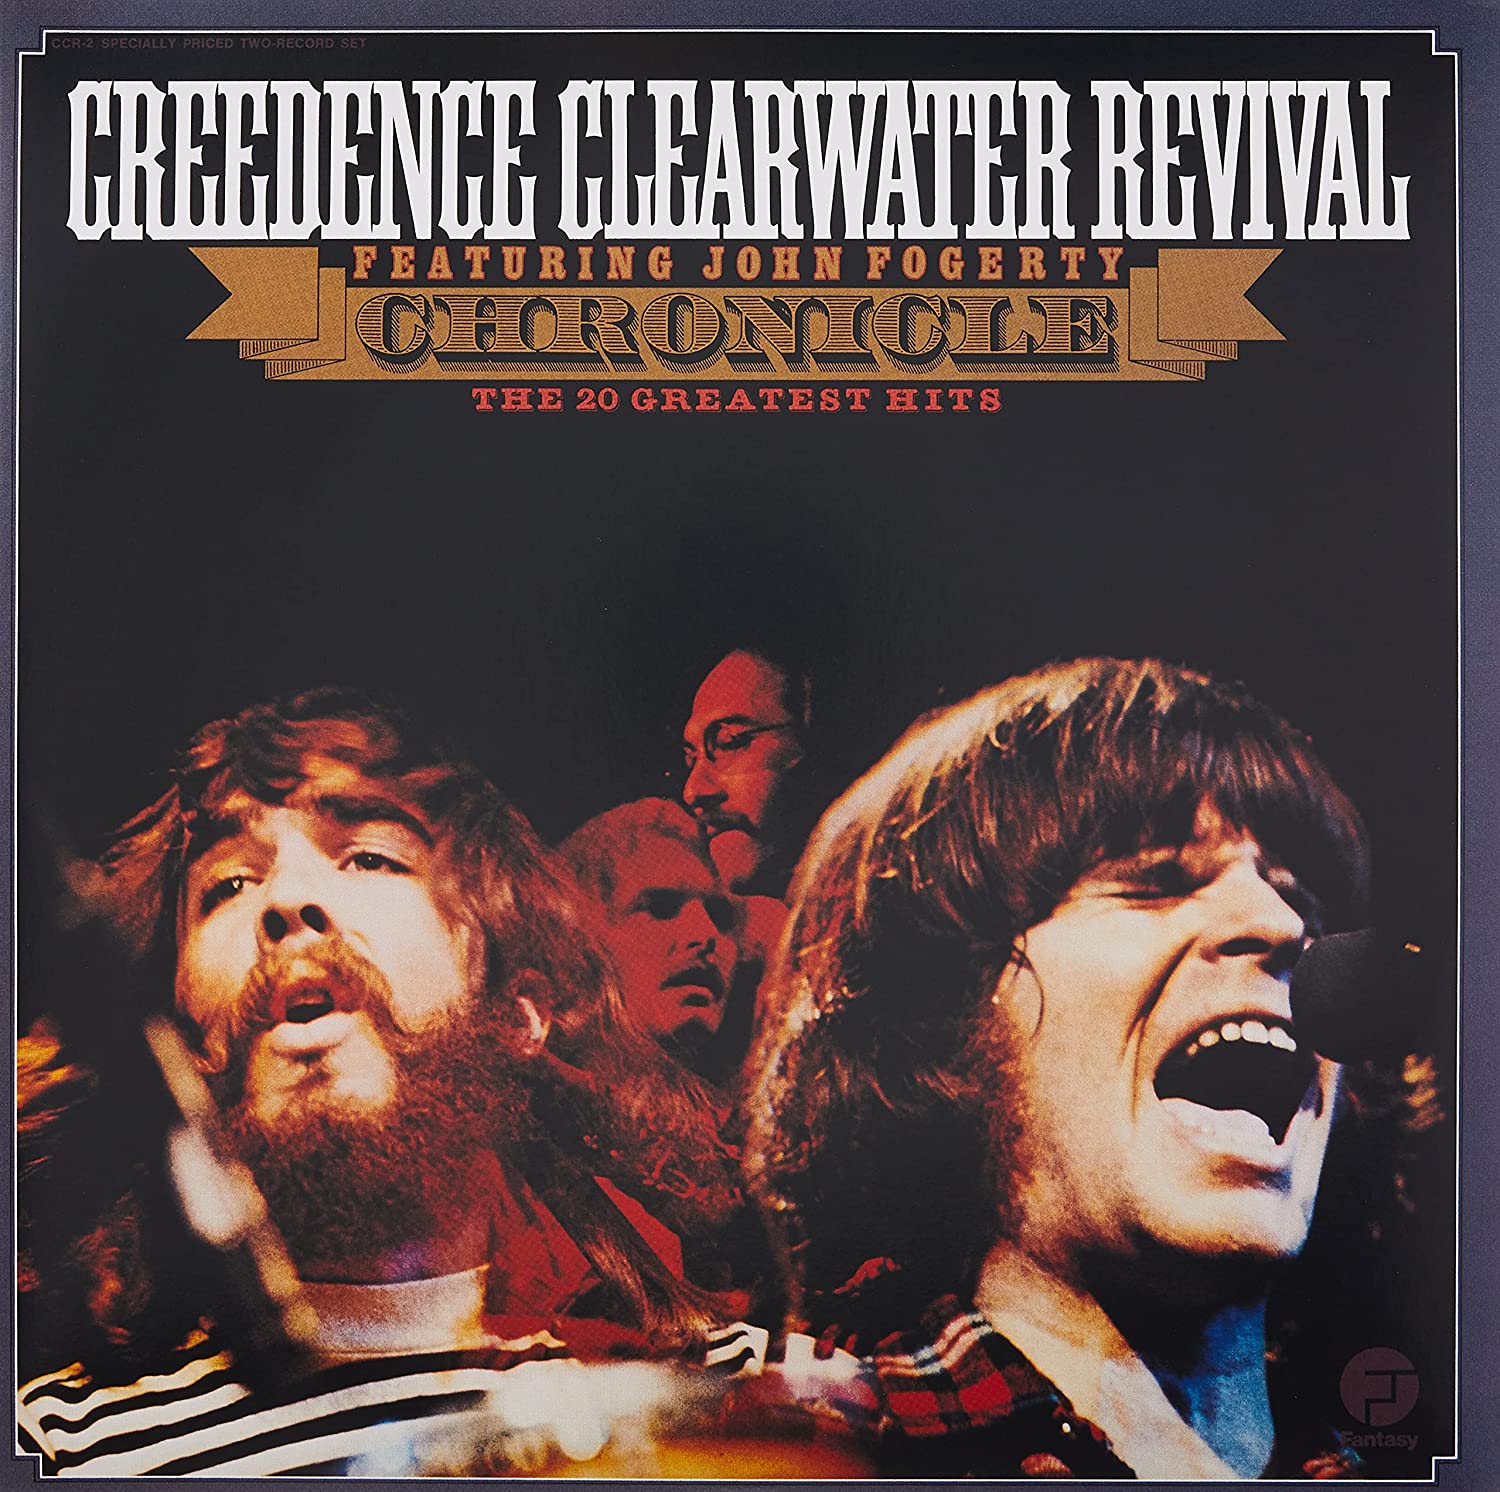 Creedence Clearwater Revival: Vol. 1-Chronicle-20 Greatest Hits [VINYL]: Amazon.co.uk: CDs & Vinyl